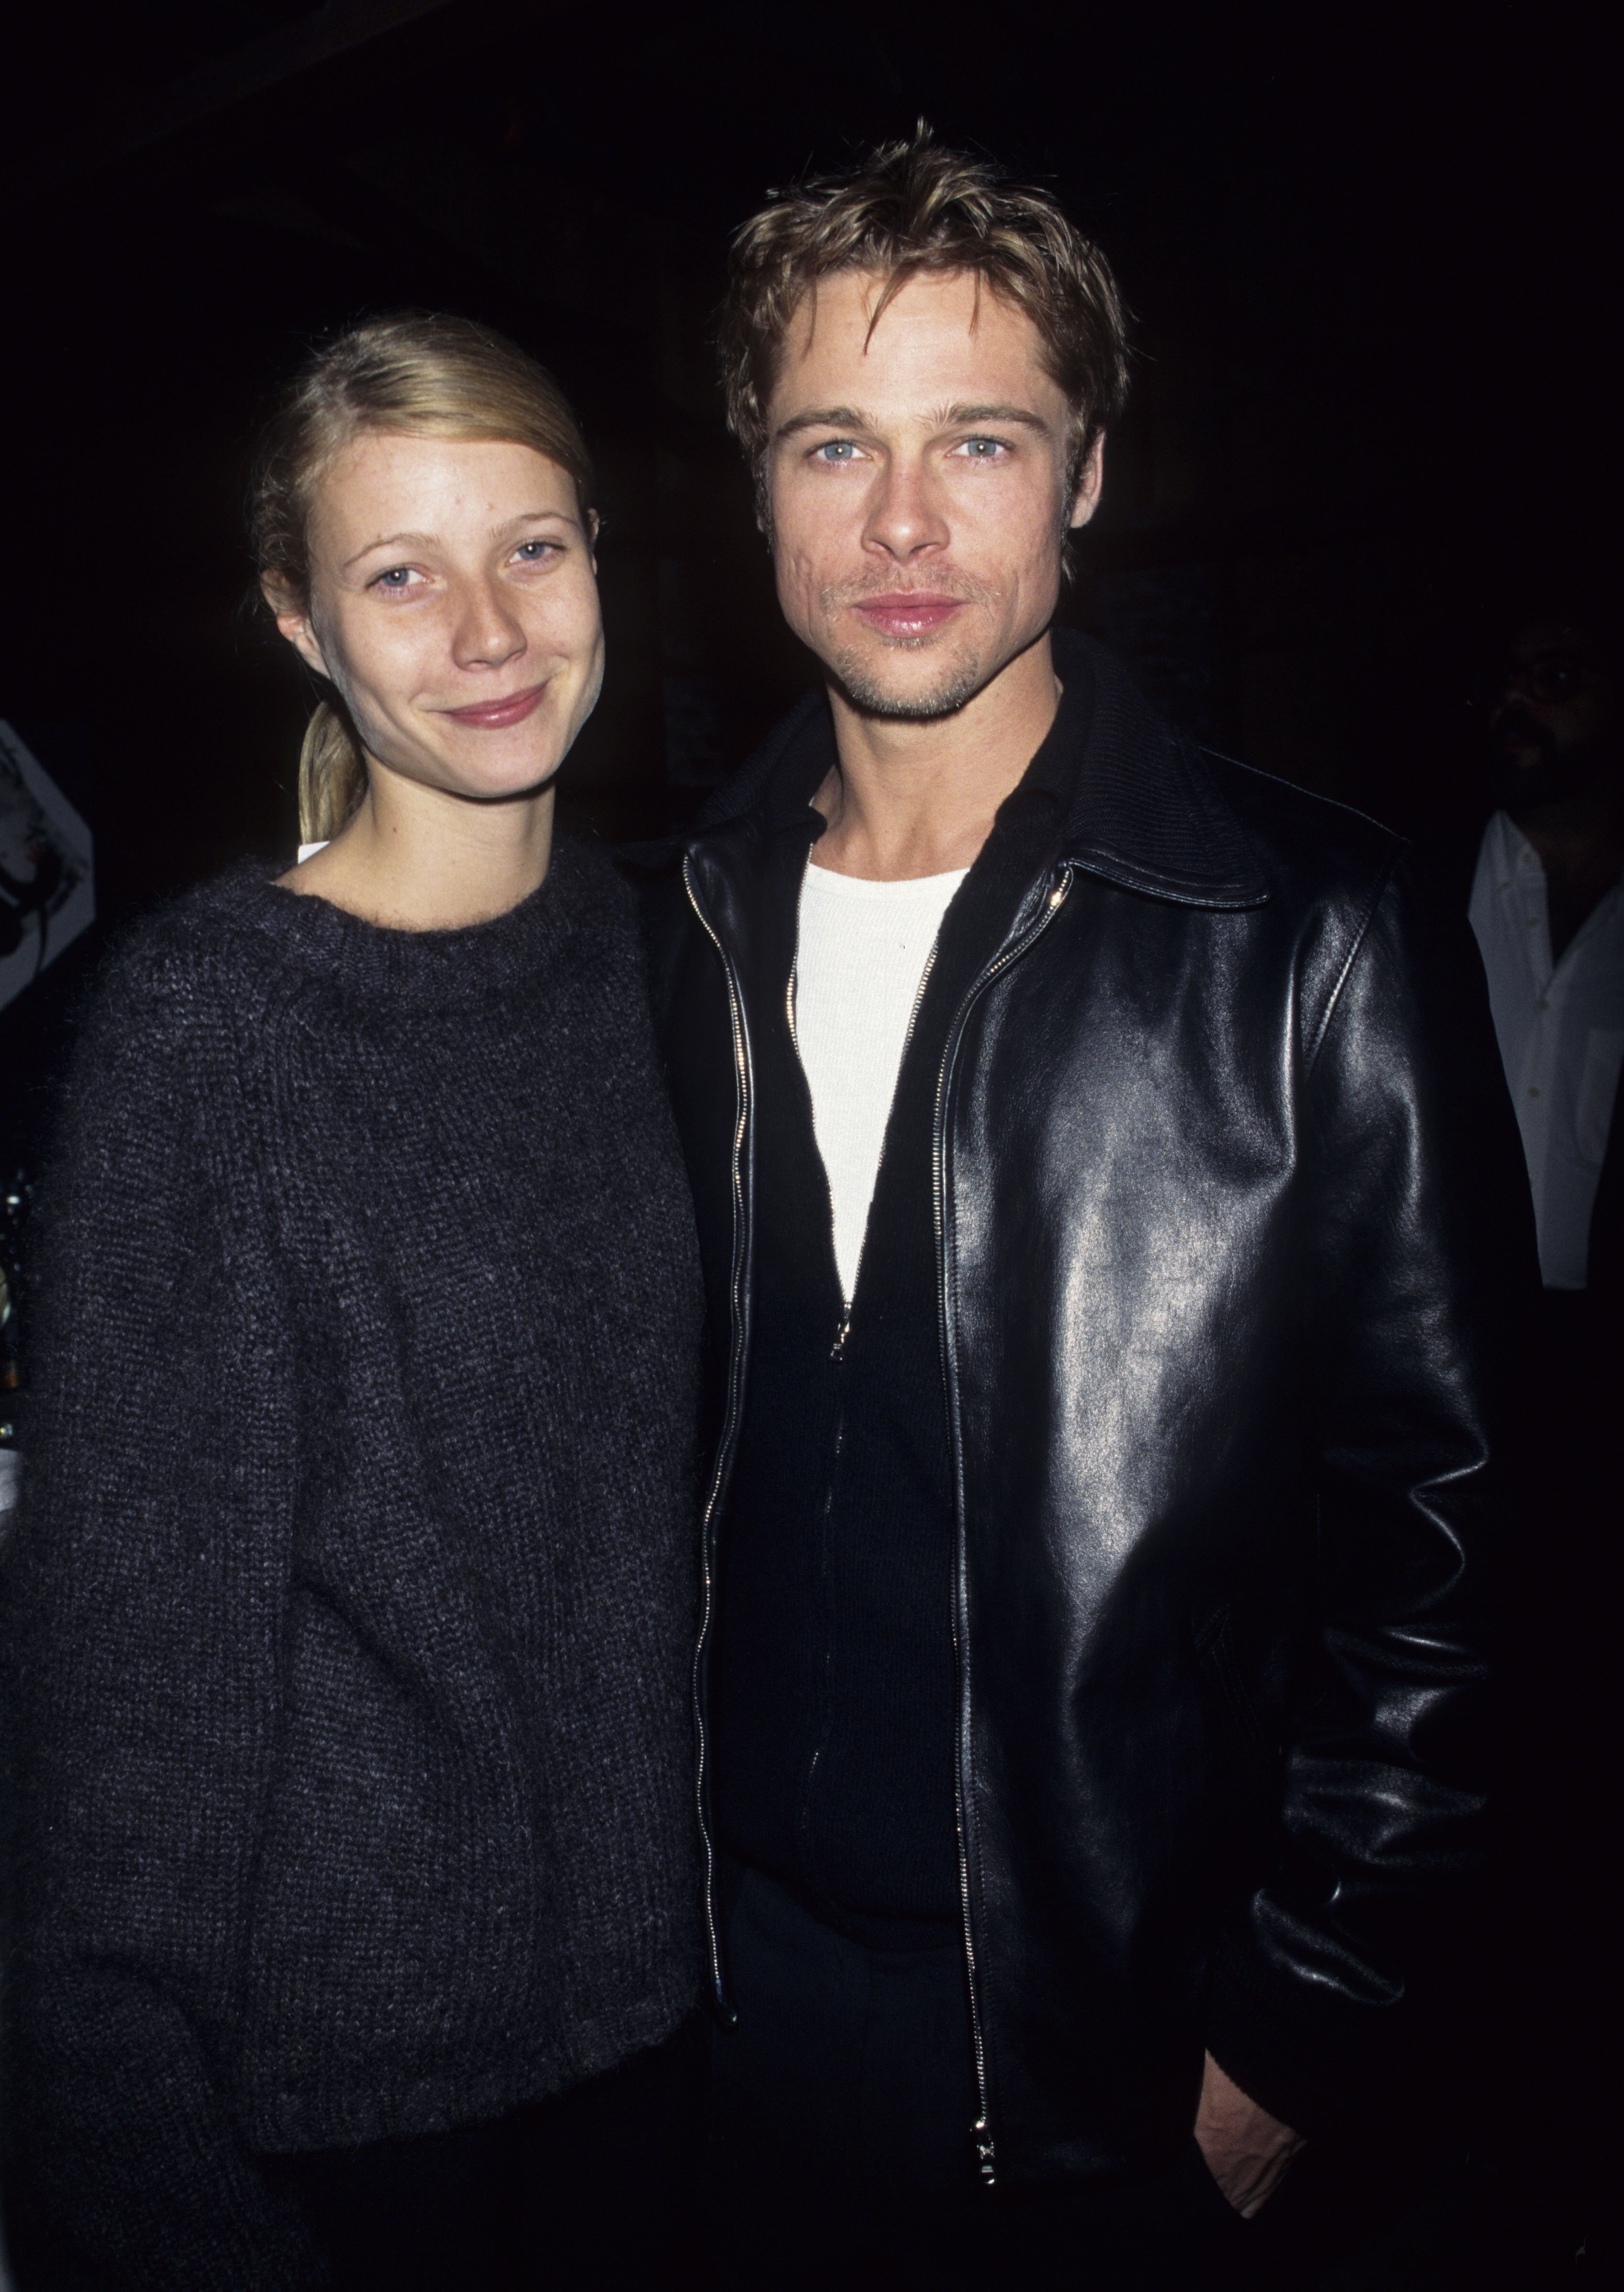 Brad Pitt and Gwyneth Paltrow at David Bowie's after-show party on October 29, 1995 | Source: Getty Images